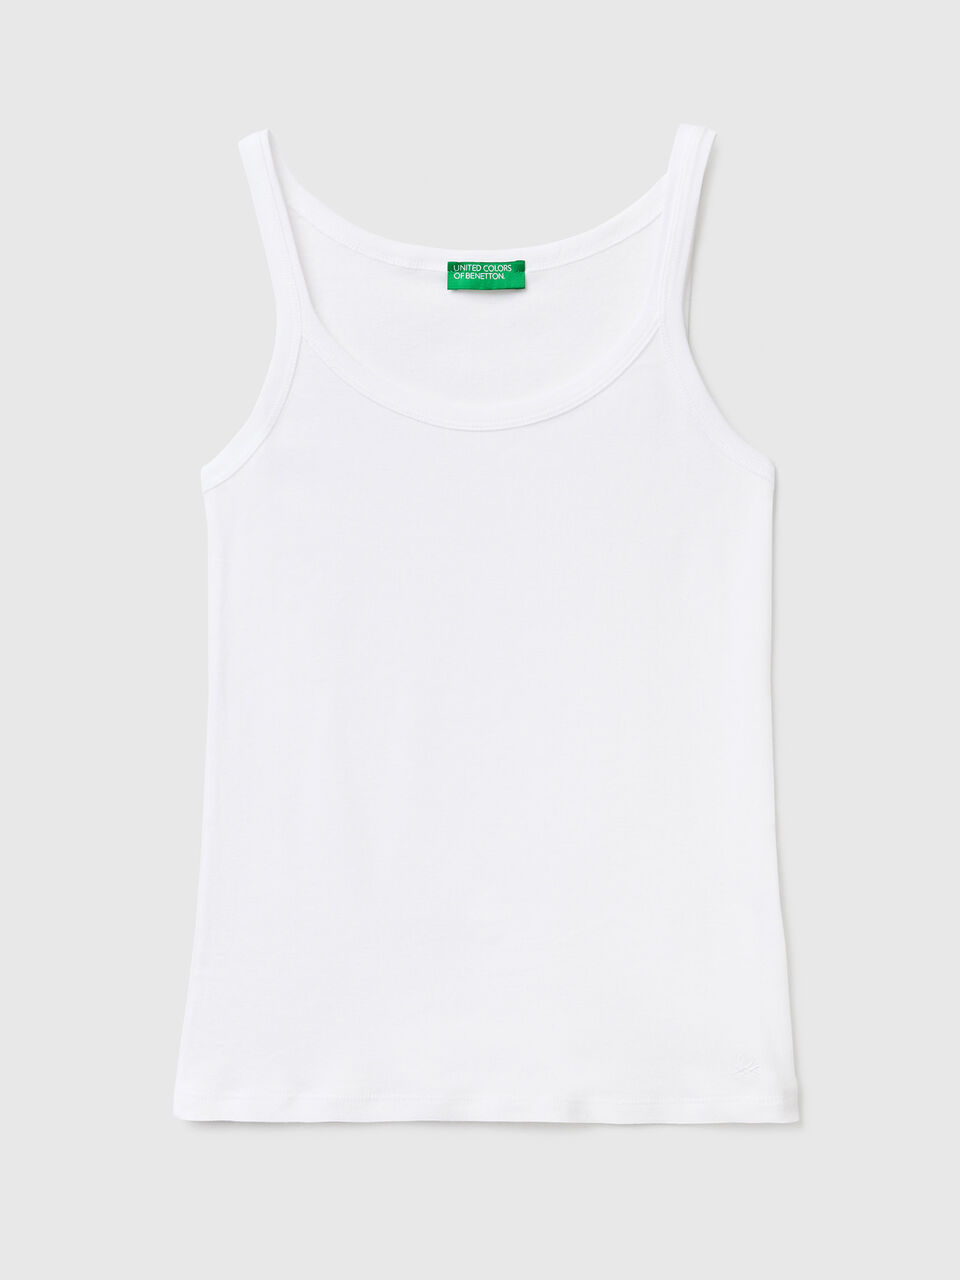 Ultra Cotton ® Unisex Tank Top - White Tank Top Transparent, HD Png  Download - 2321x3585(#2361134) - PngFind